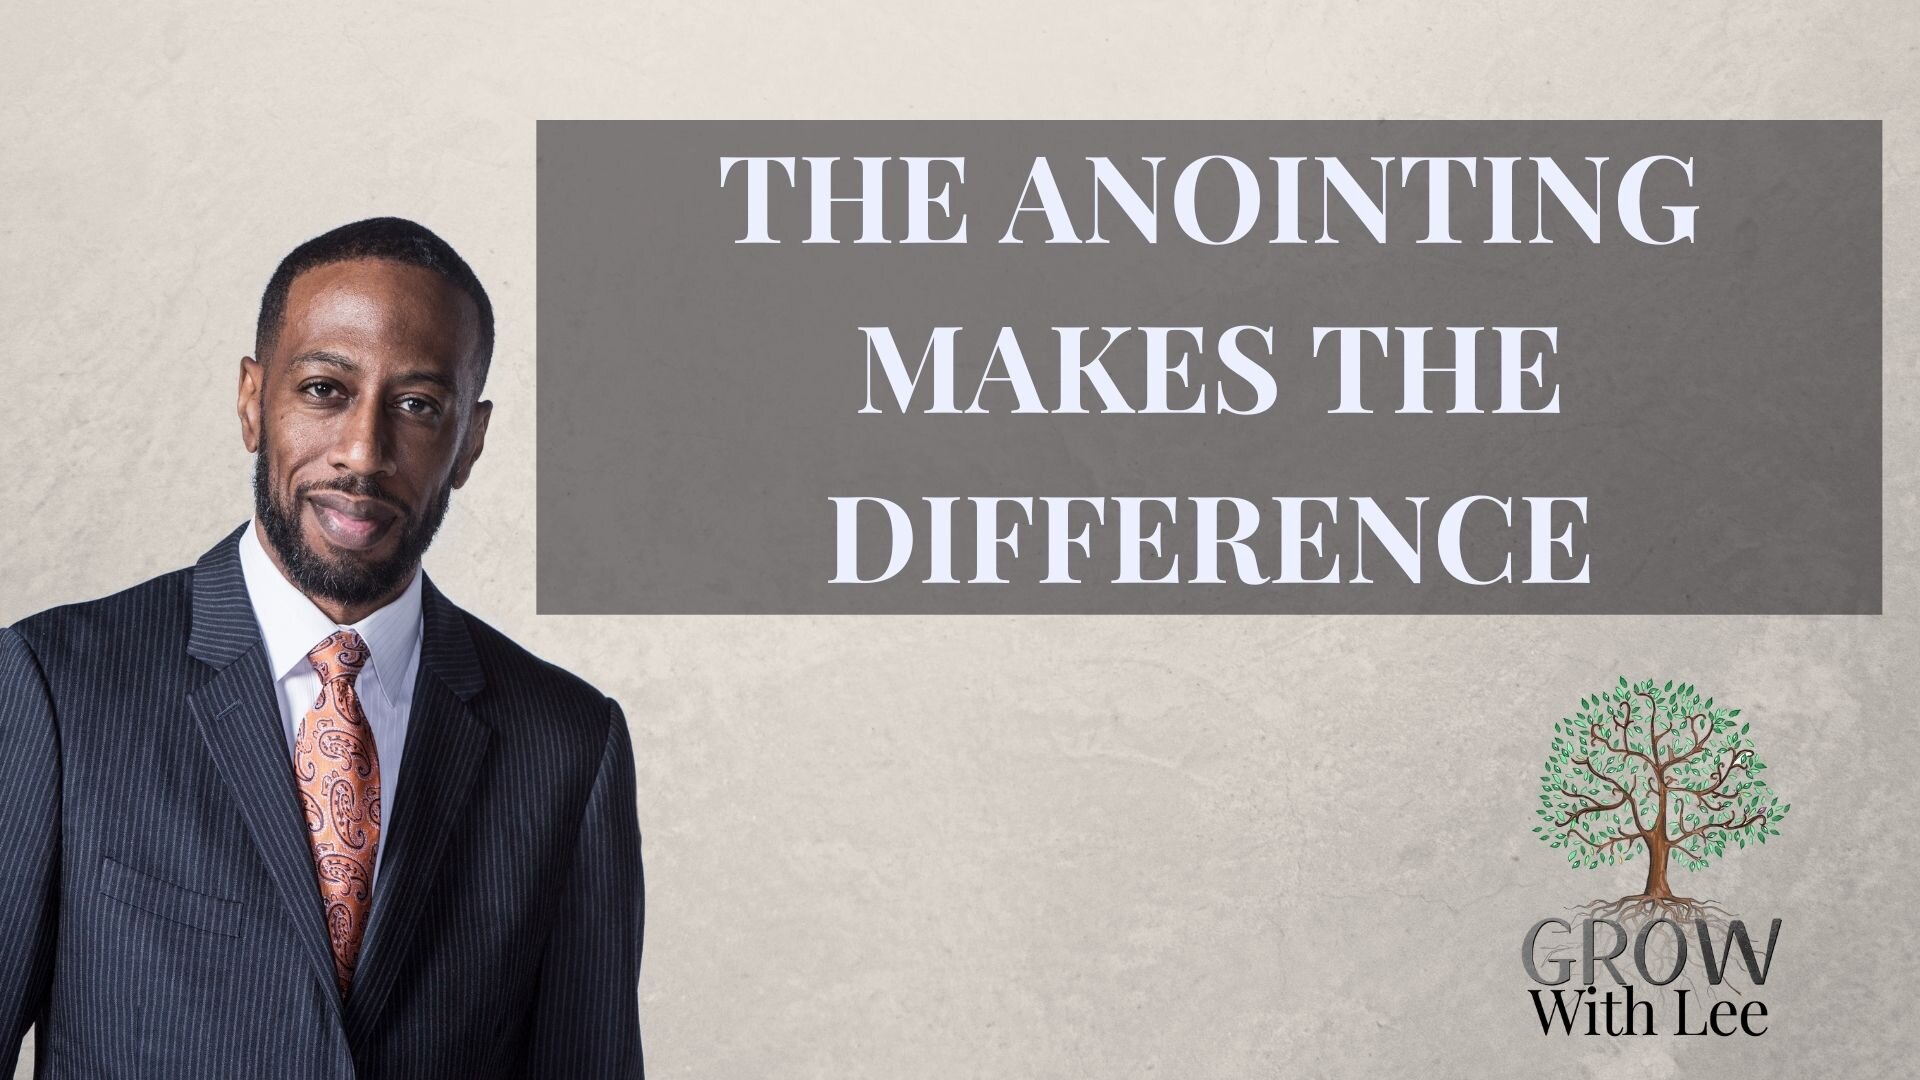 The Anointing Makes The Difference